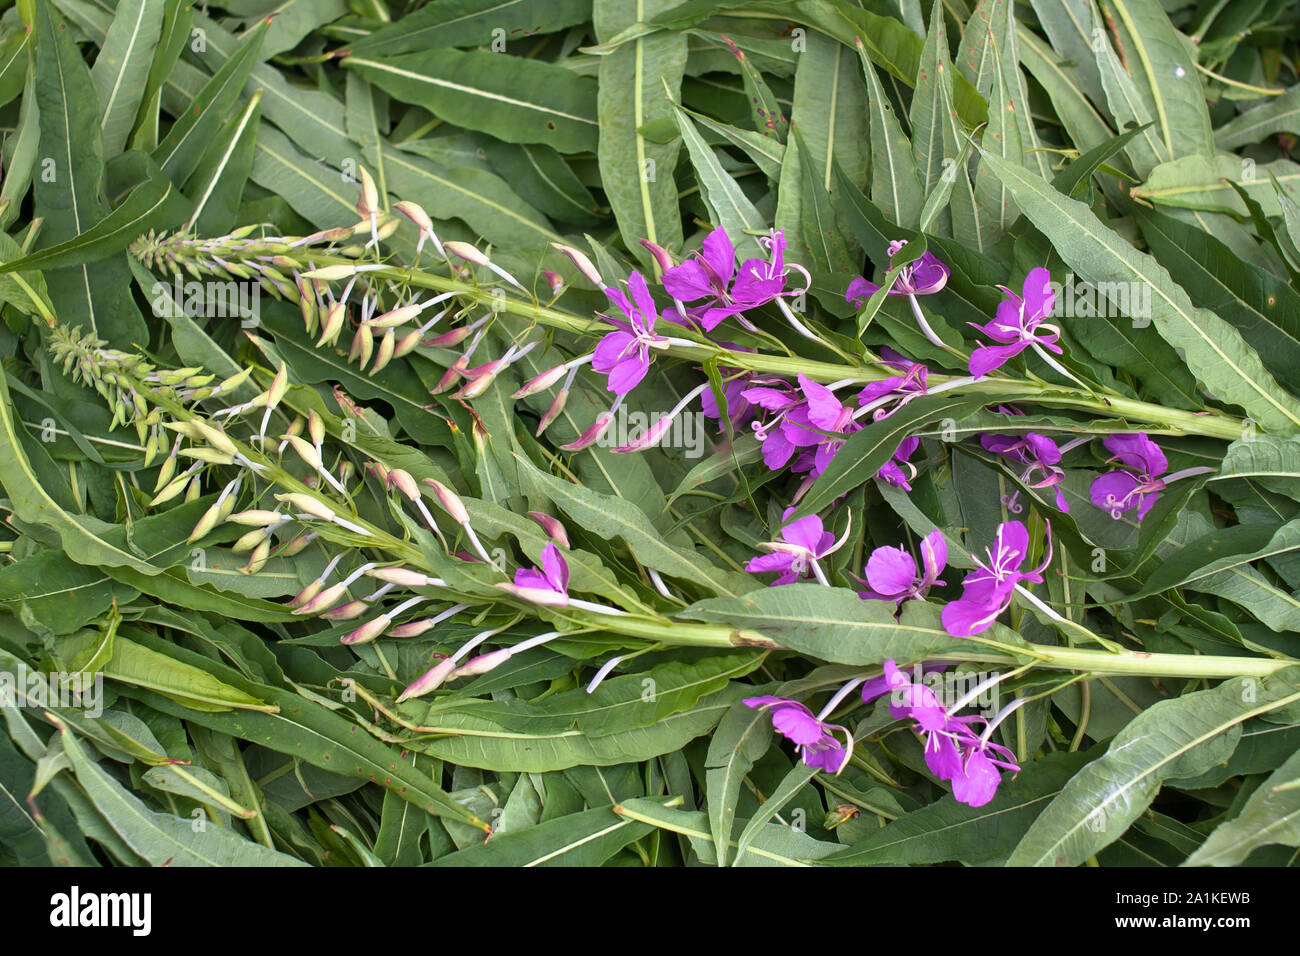 leaves and flowers willow-herb (Ivan-tea), close up Stock Photo